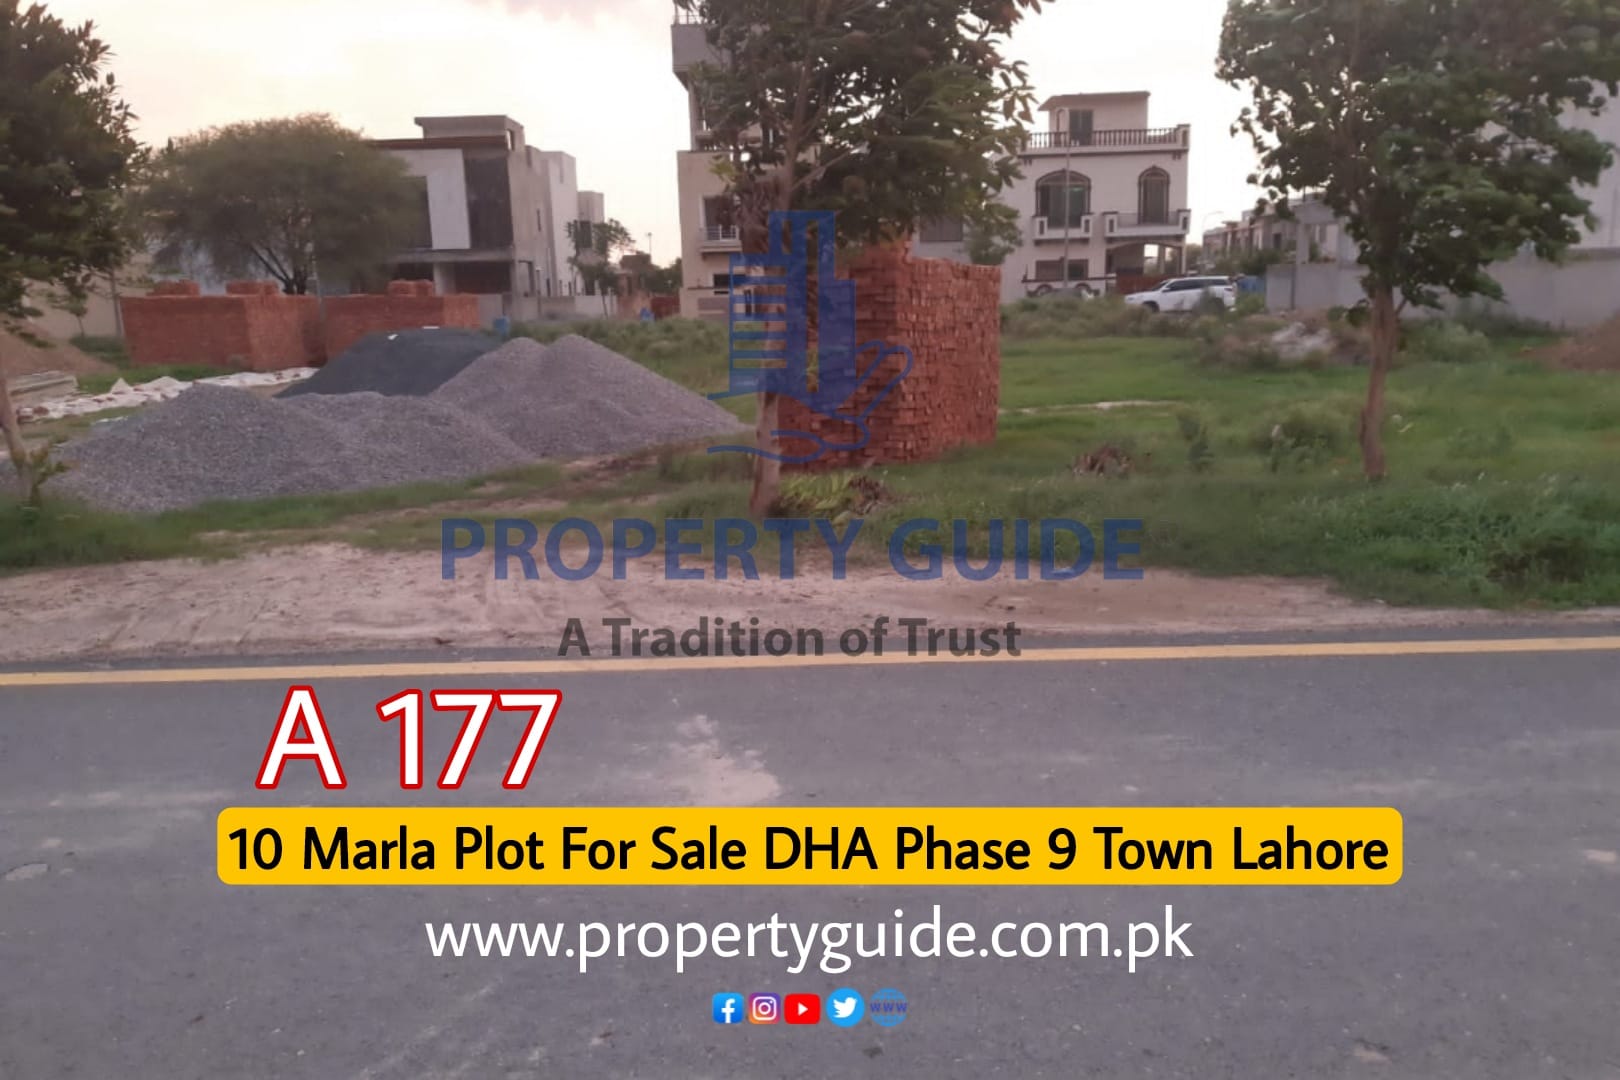 10 Marla Plot For Sale DHA Phase 9 Town Lahore On 120 Feet Road